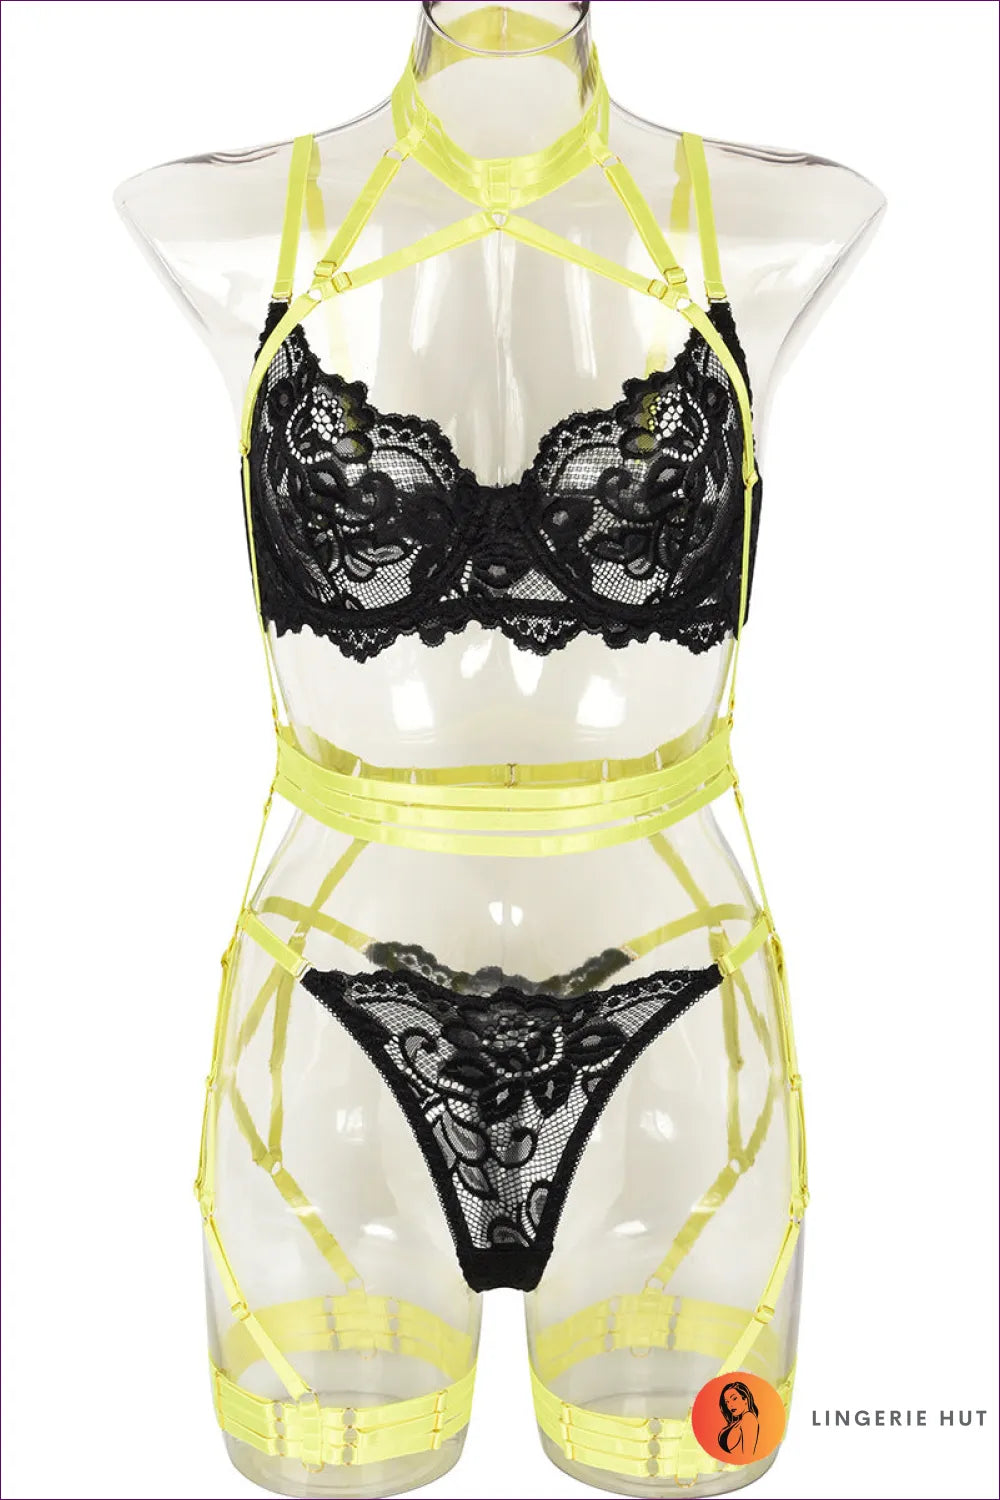 Command Attention, Lace Strap, Leg Ring Choker! Sizzle Effortlessly With This Printed Masterpiece. But Don’t